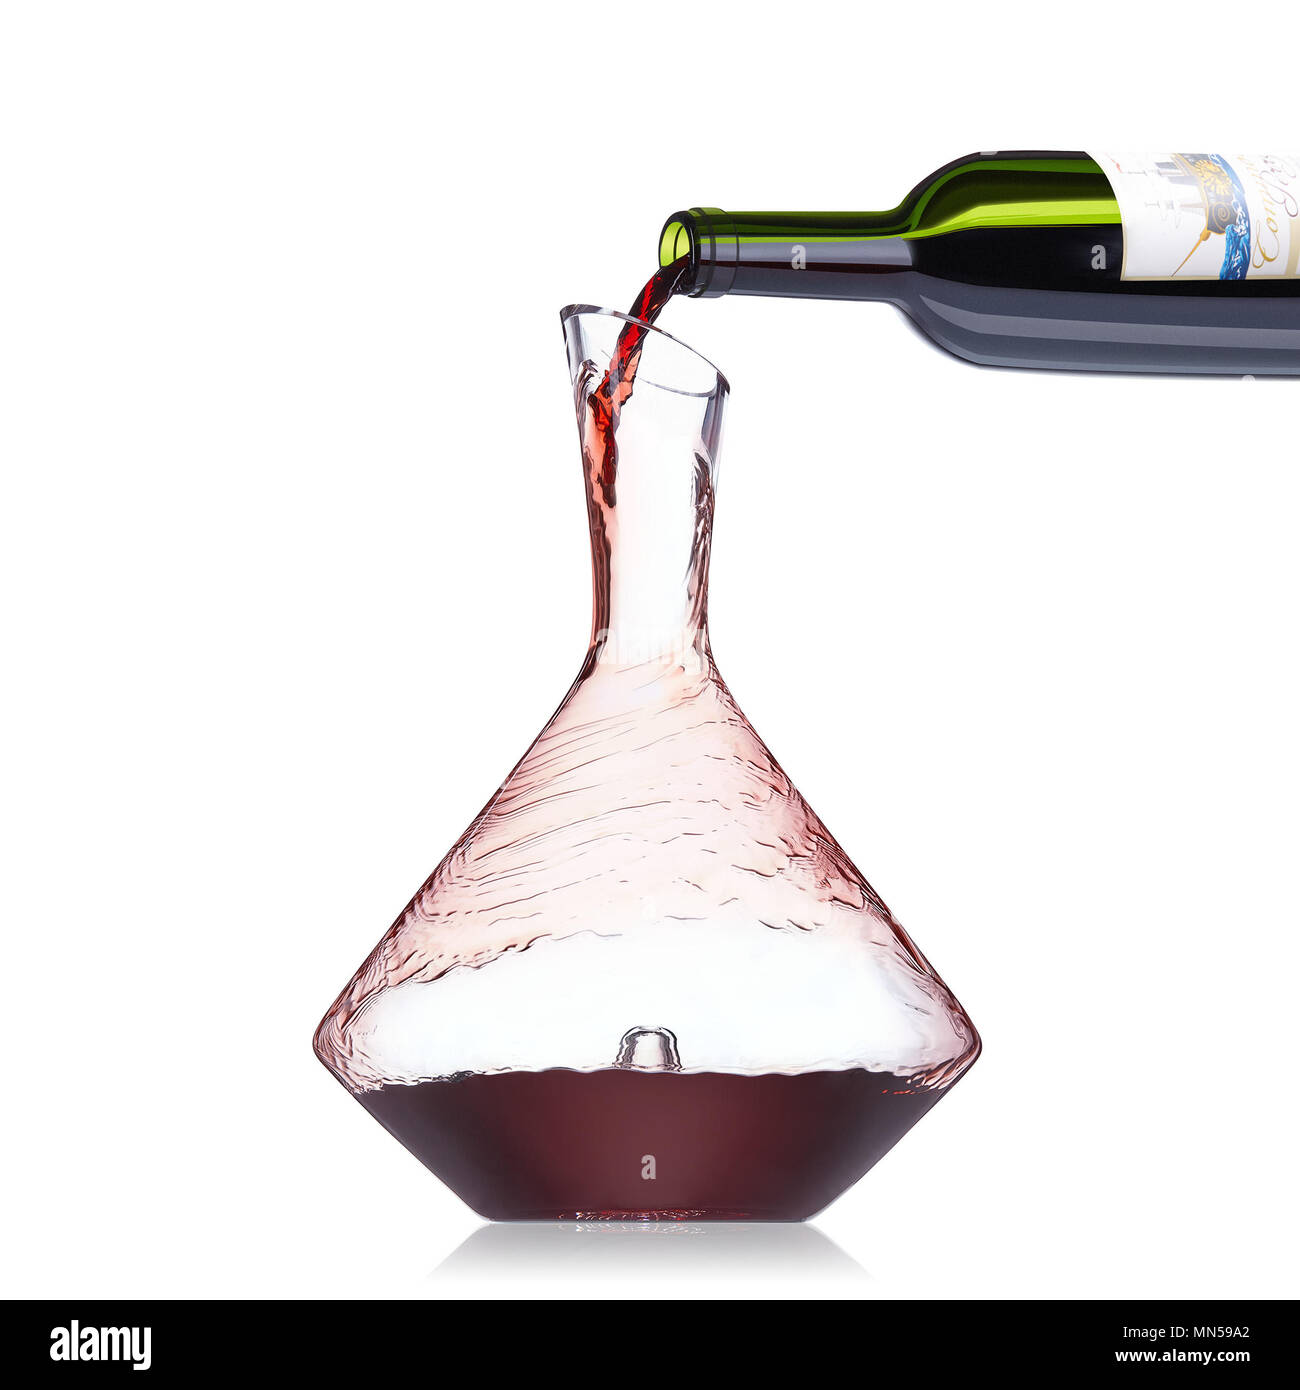 Crystal glass decanter pouring wine Stock Photo